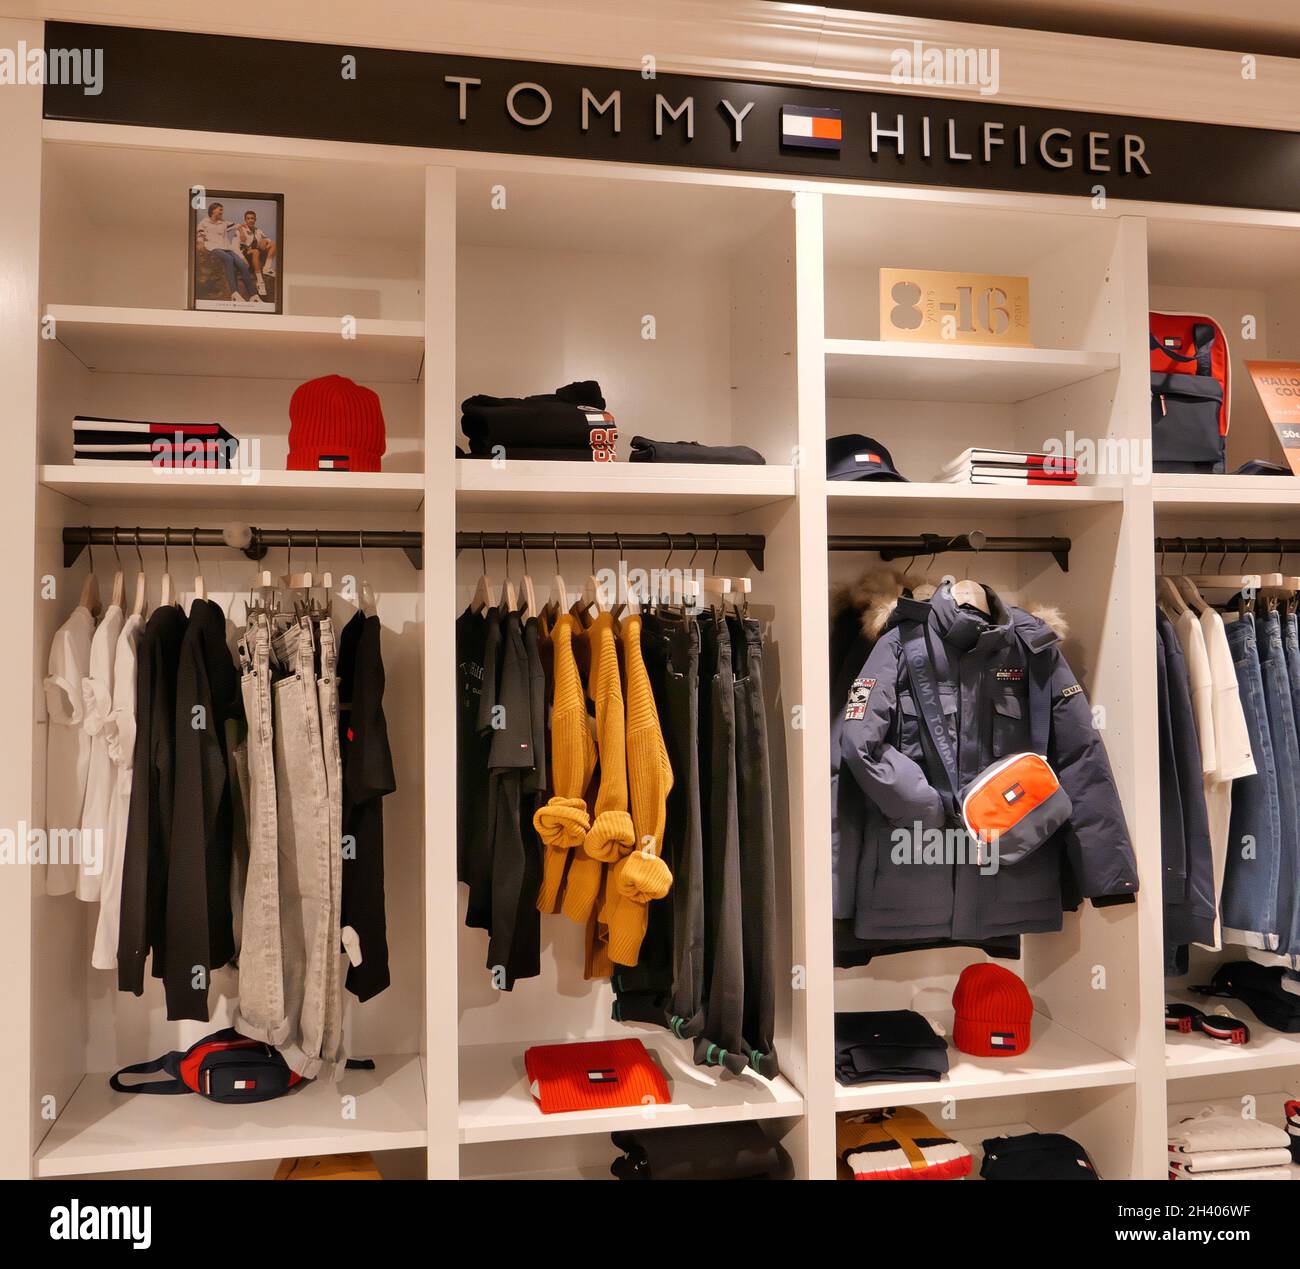 Tommy hilfiger display stock photography images - Alamy